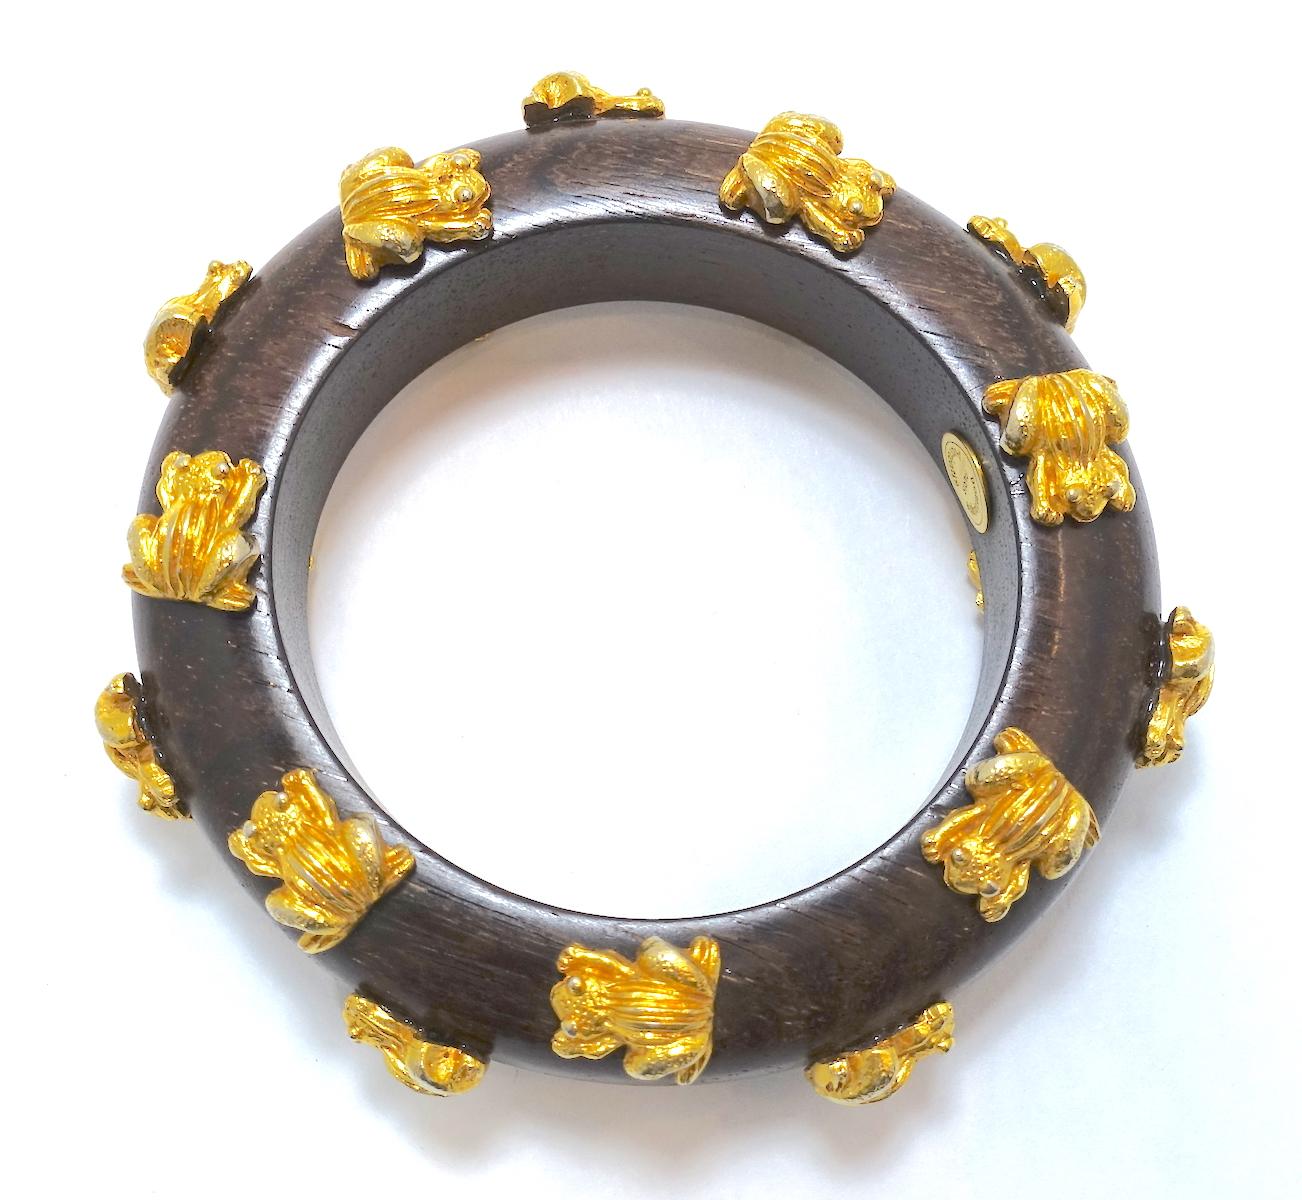 This vintage, very collectible signed Dominique Aurientis bangle bracelet features 3-dimensional gold tone frogs all along the wood bangle.  This piece measures 7-1/2” around the inside x 3/4” wide and is signed “Dominique Aurientis”.  It is in